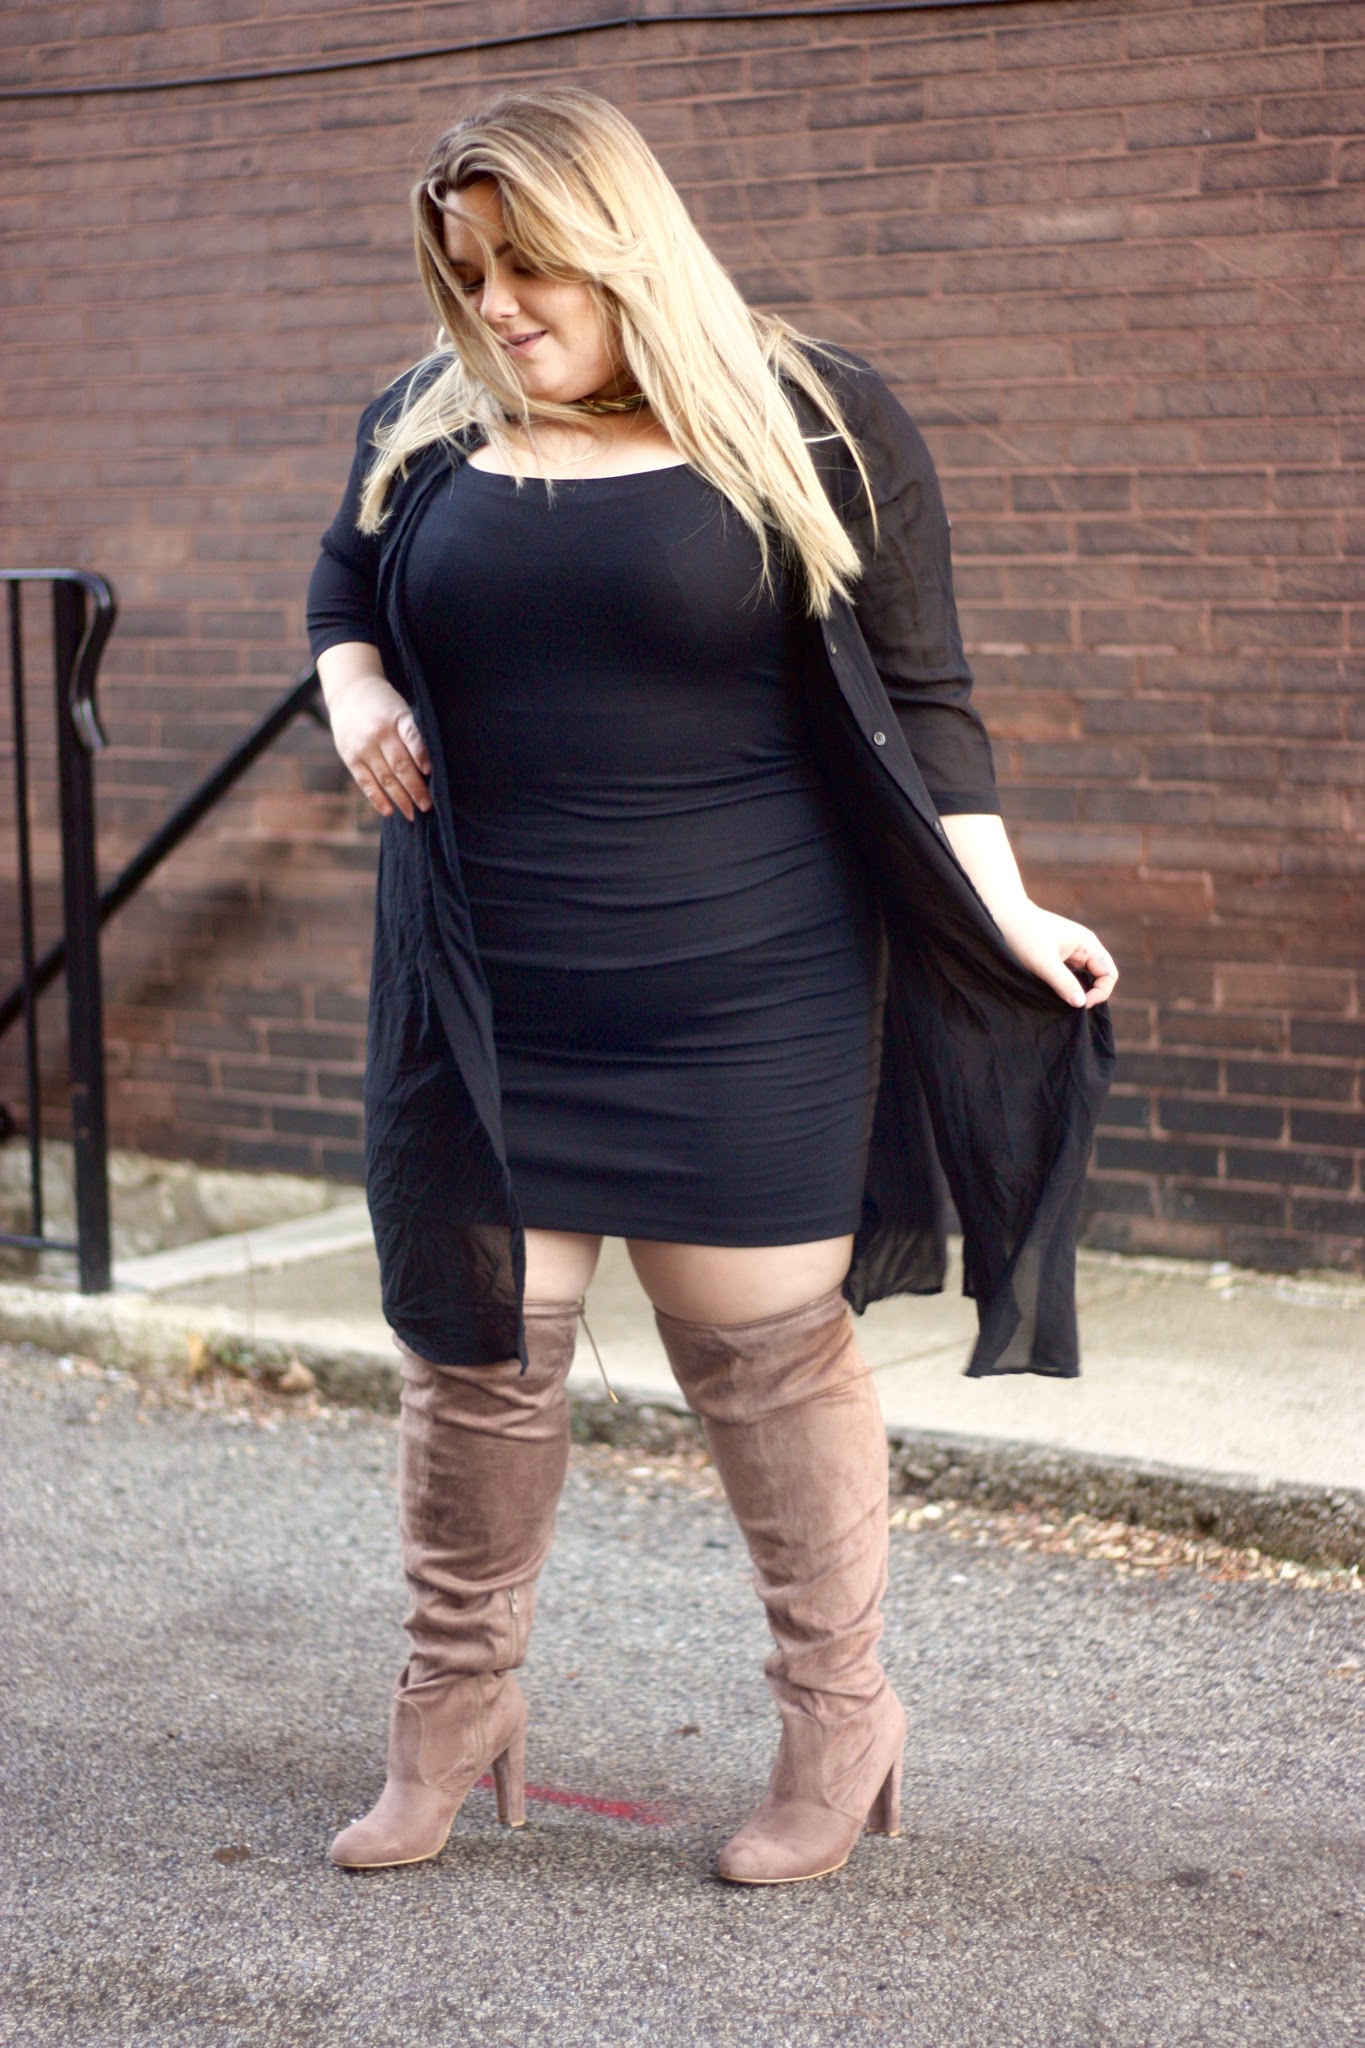 Natalie in the City shares cute thigh high wide calf boots and styles a plus size dress with knee high boots.